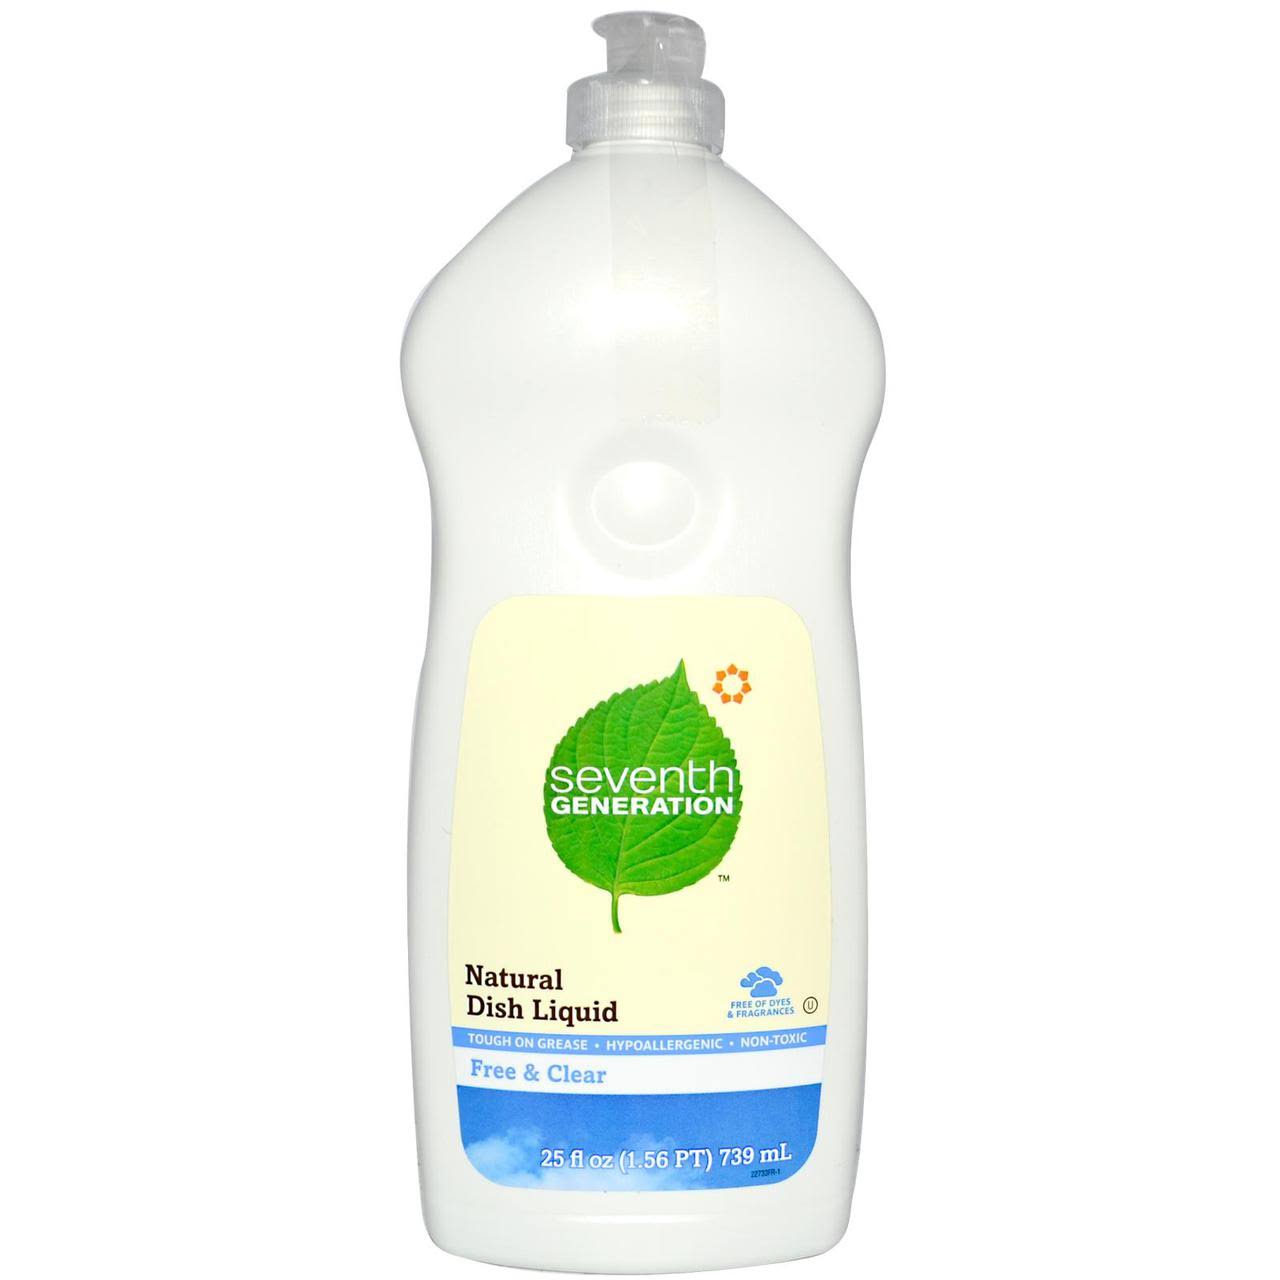 Seventh Generation Natural Washing Up Dish Liquid - Free and Clear, 739ml